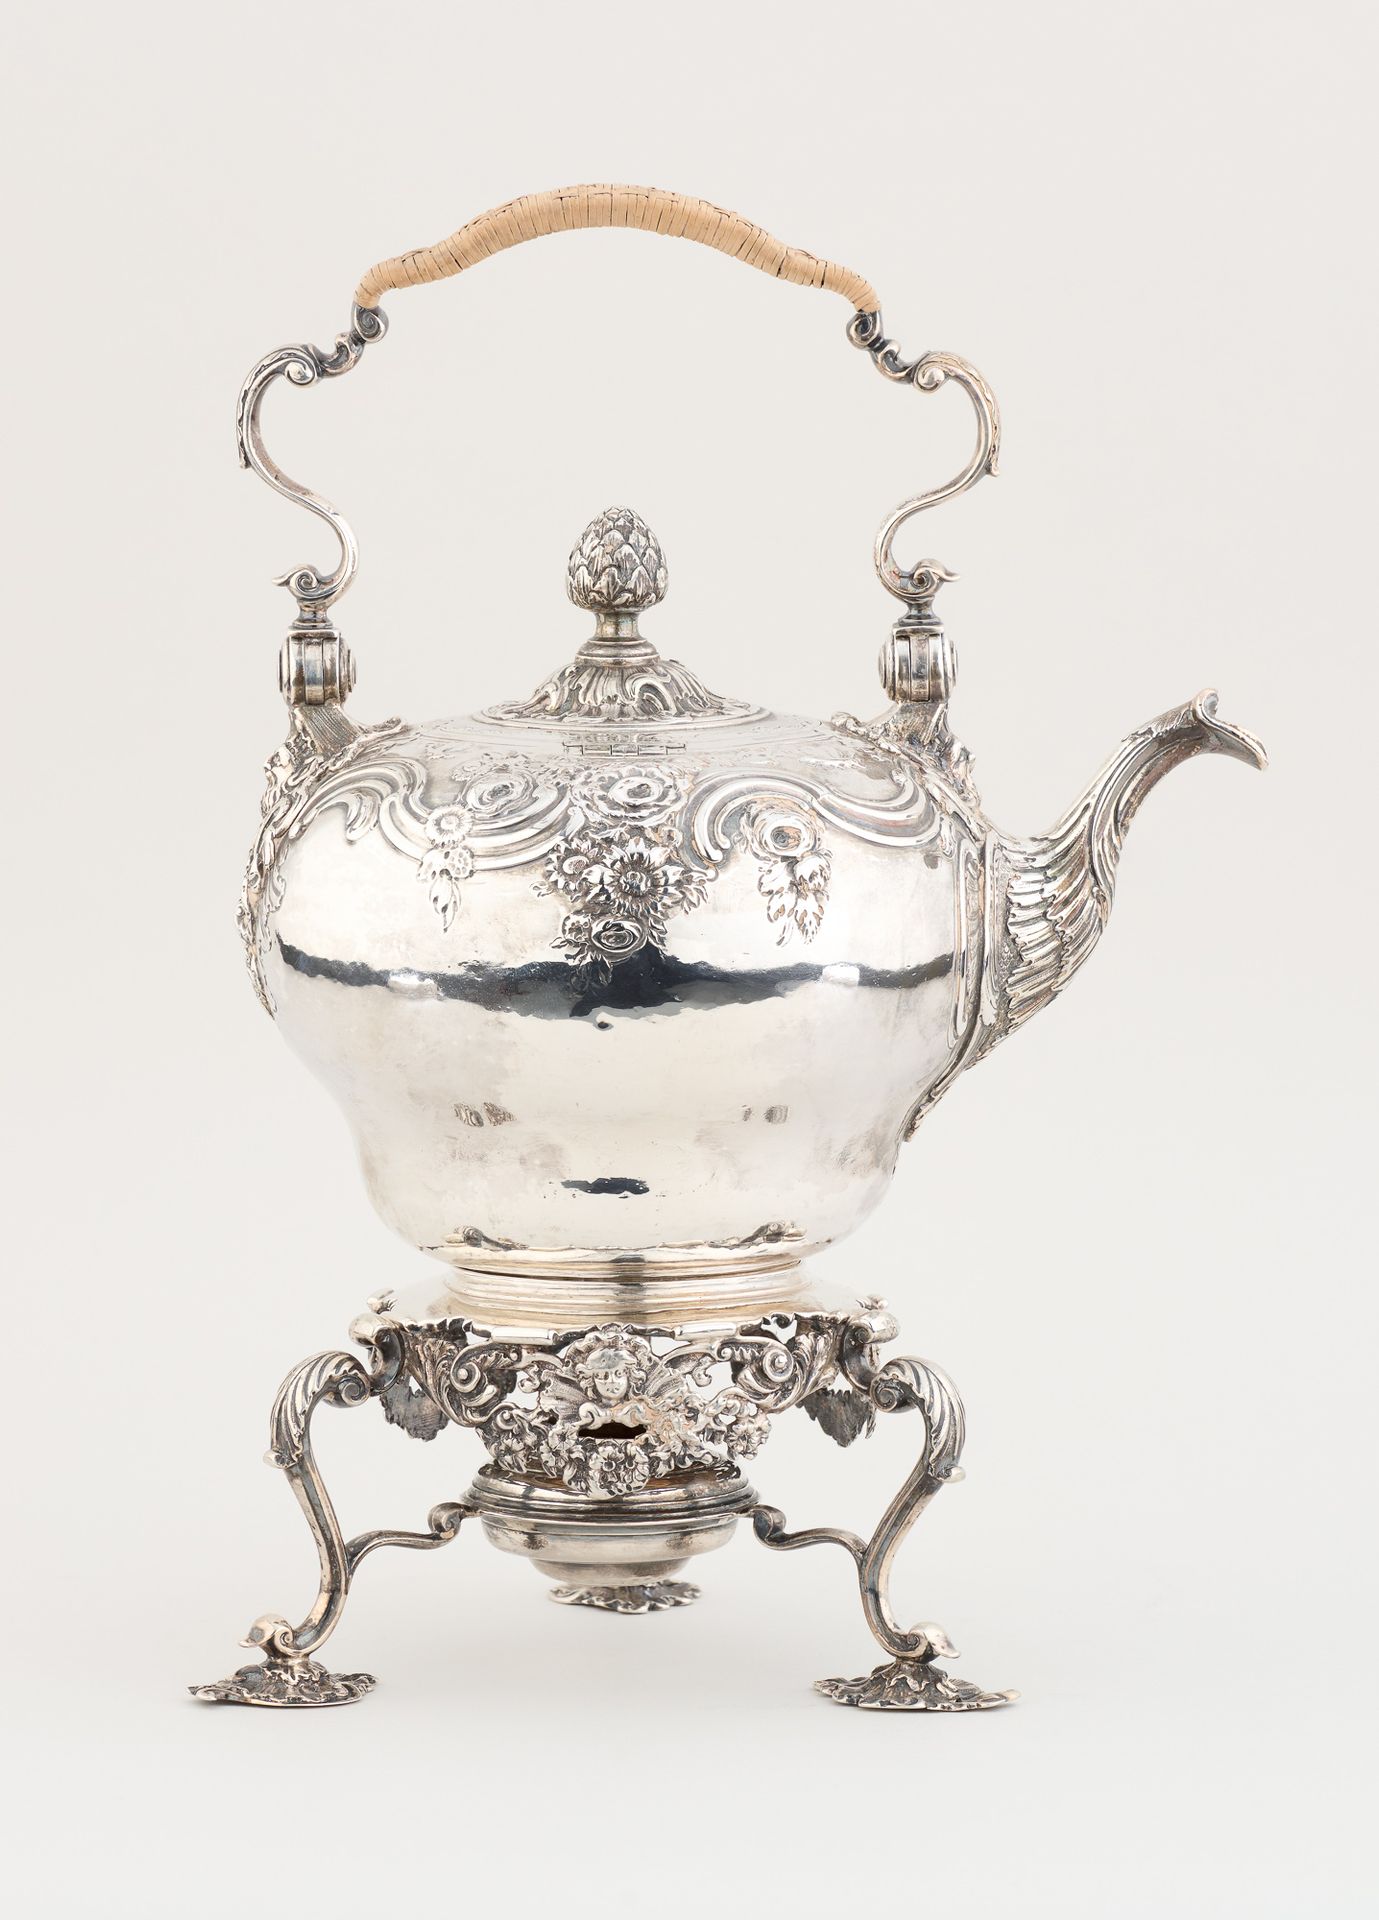 Travail du 18e. Silverware: Teapot on its stove in chased silver.

Hallmark unde&hellip;